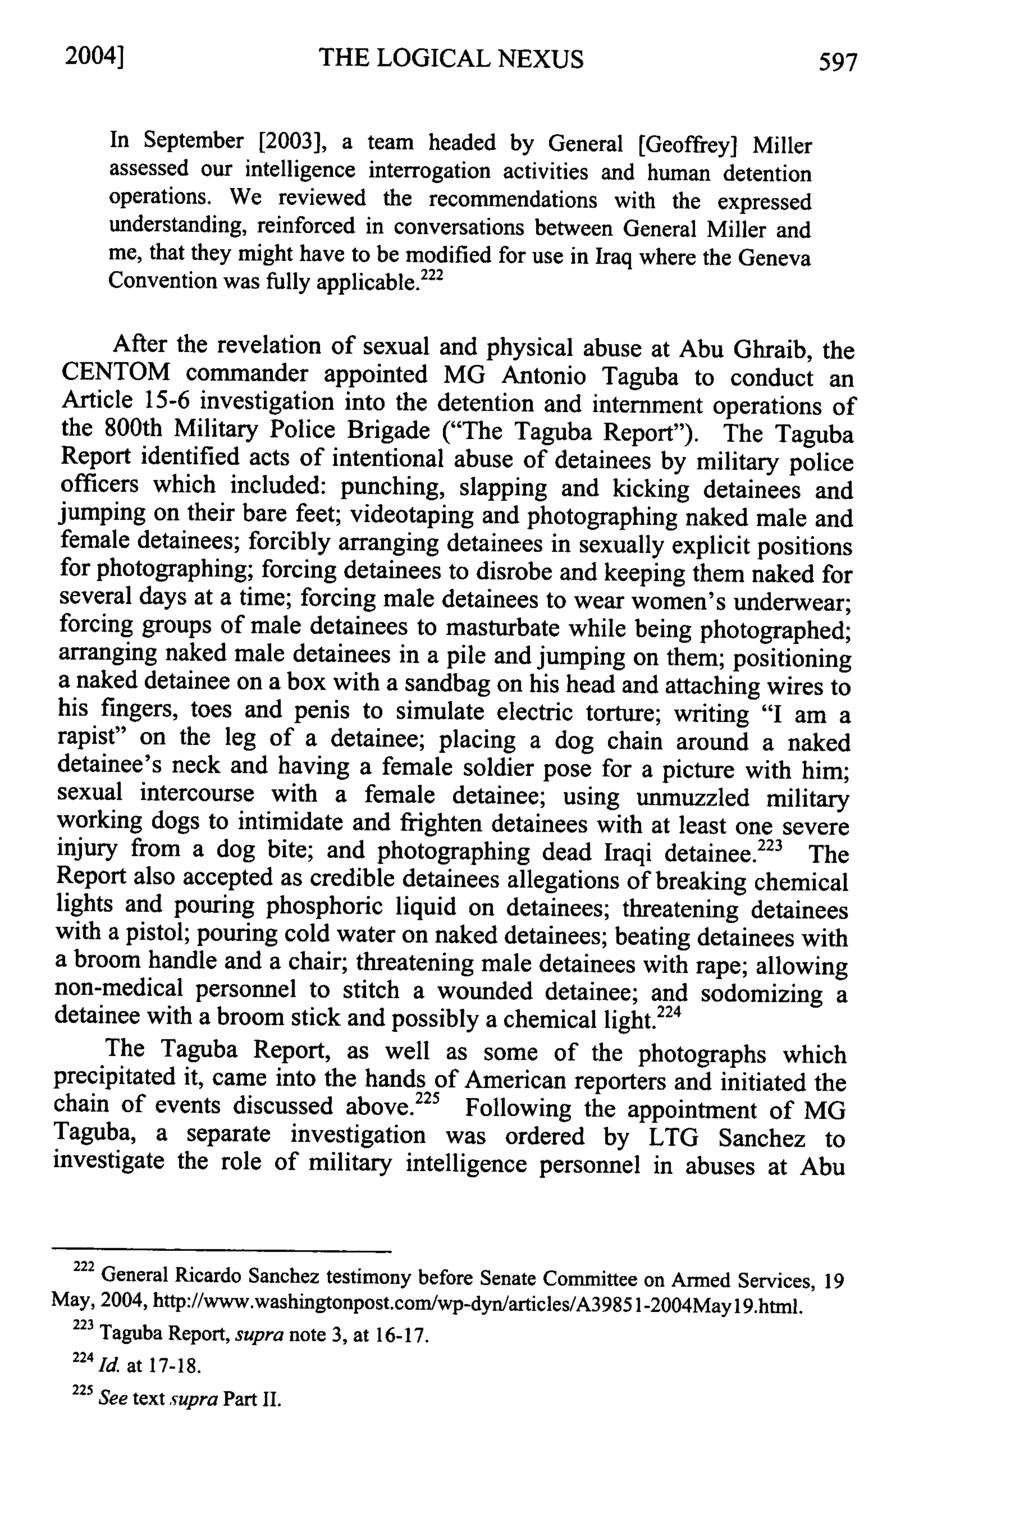 2004] THE LOGICAL NEXUS In September [2003], a team headed by General [Geoffrey] Miller assessed our intelligence interrogation activities and human detention operations.